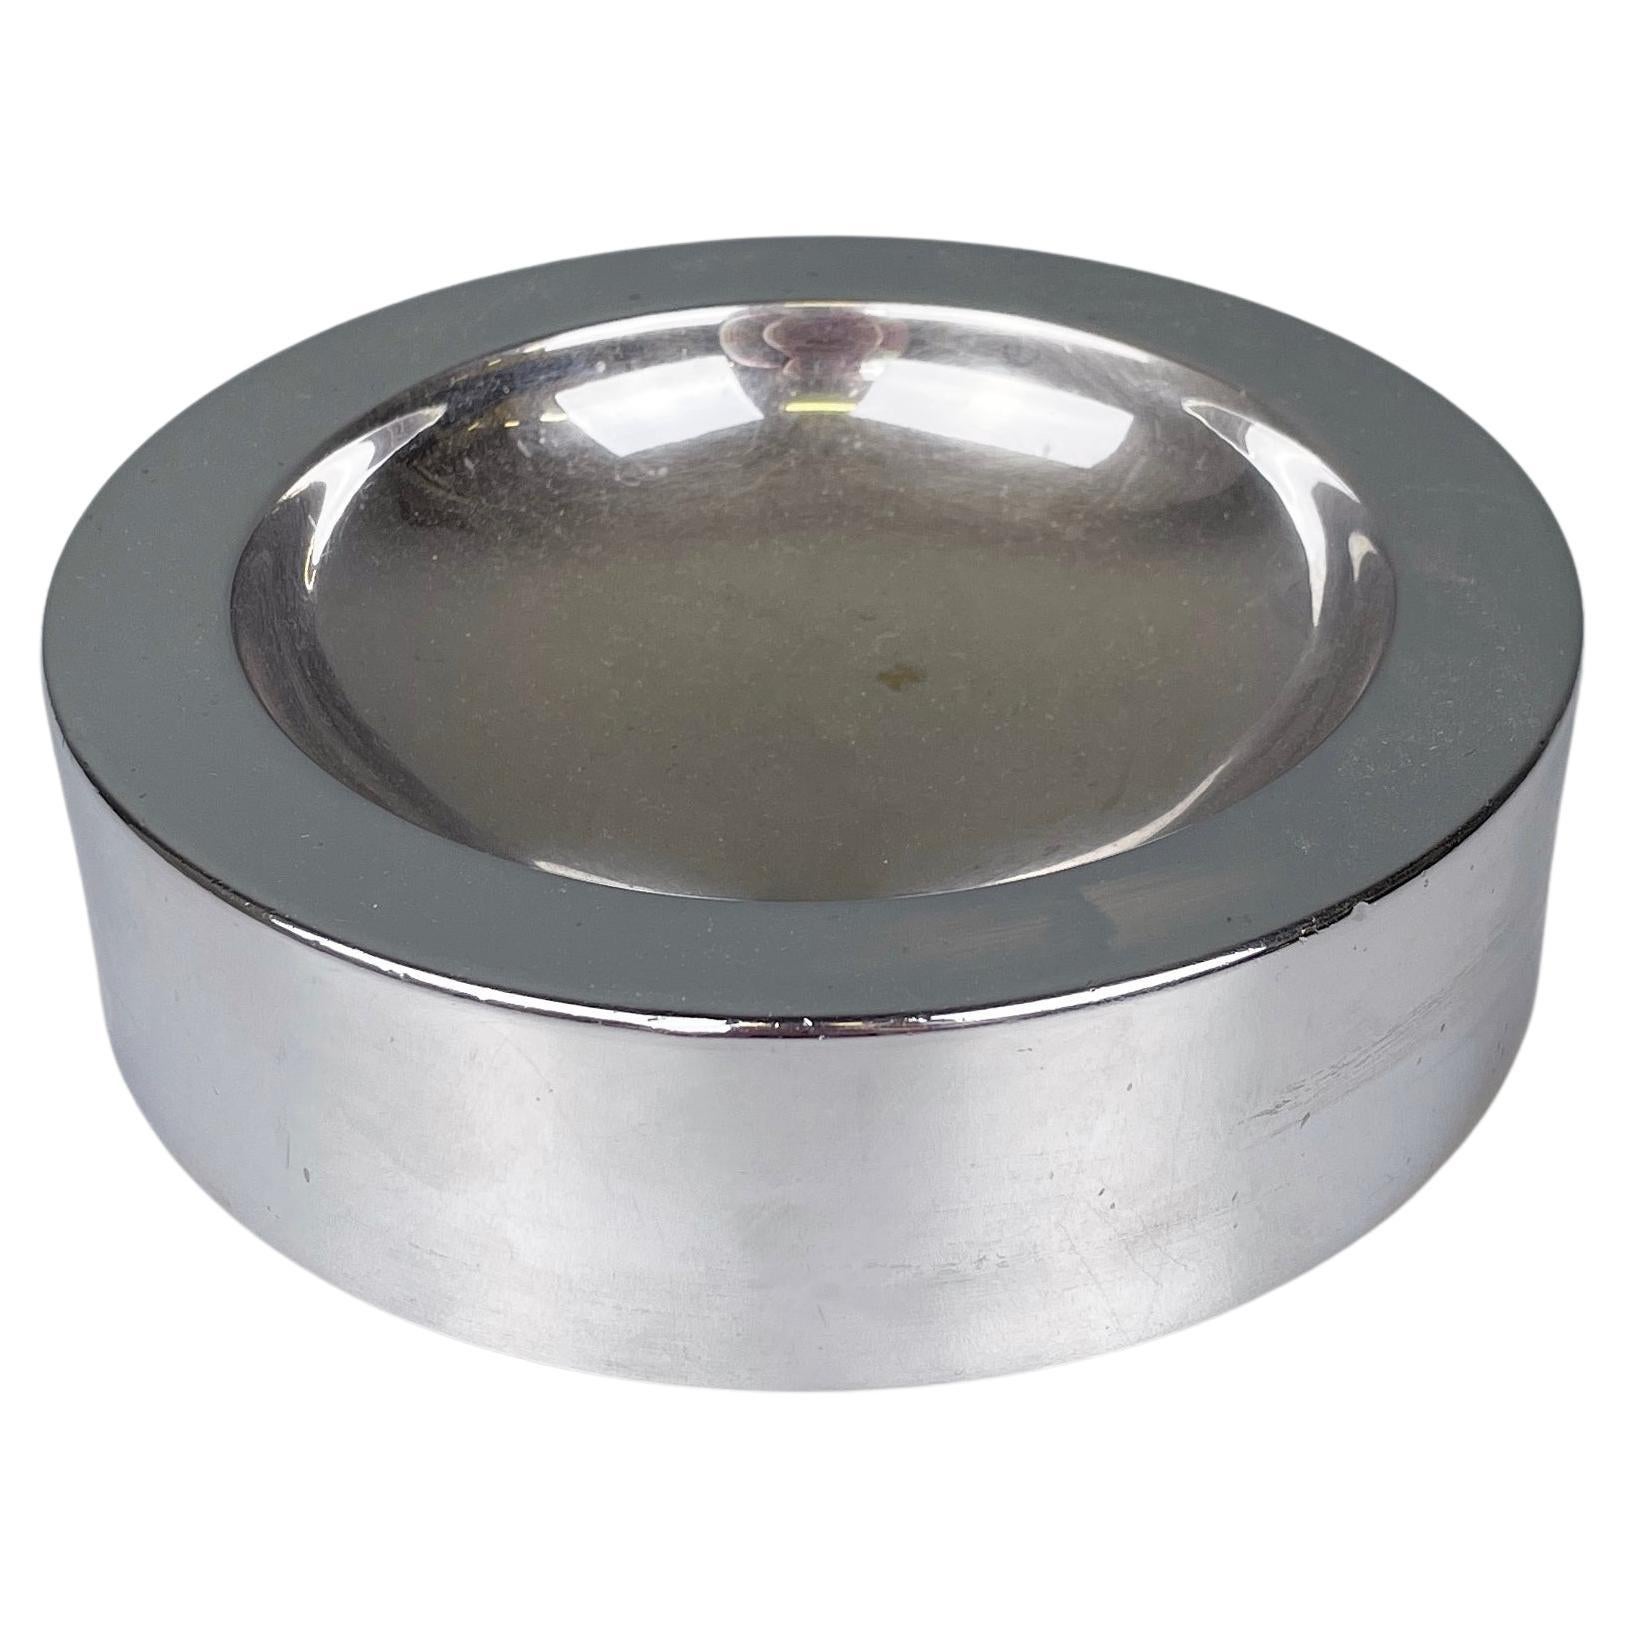 Italian modern round table ashtray in steel by Dada International Design, 1980s For Sale